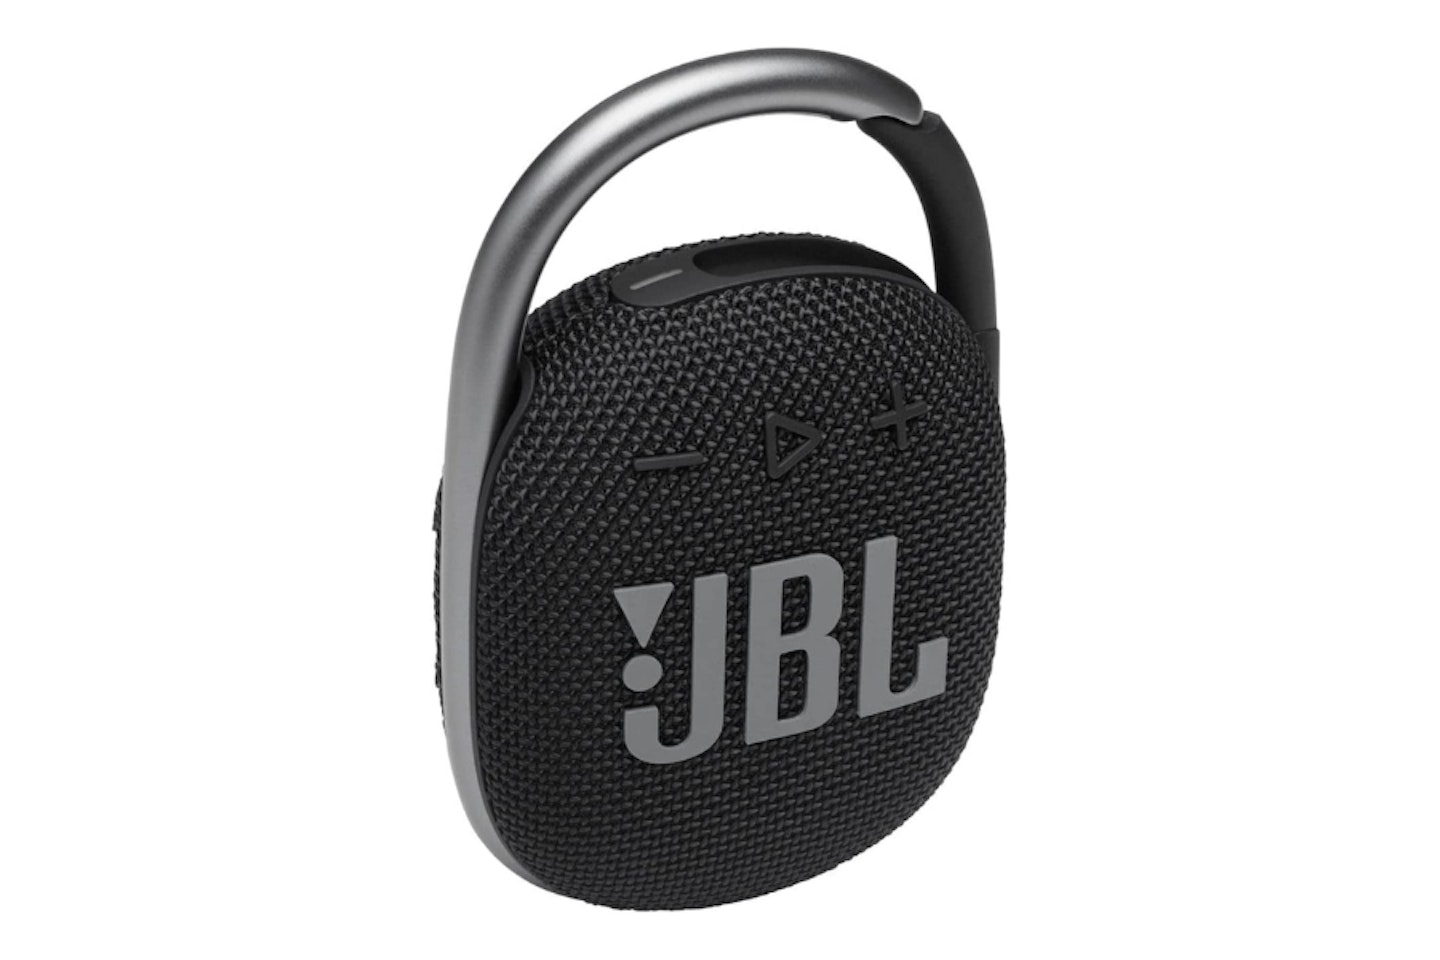 JBL Clip 4 -  one of the best portable speakers